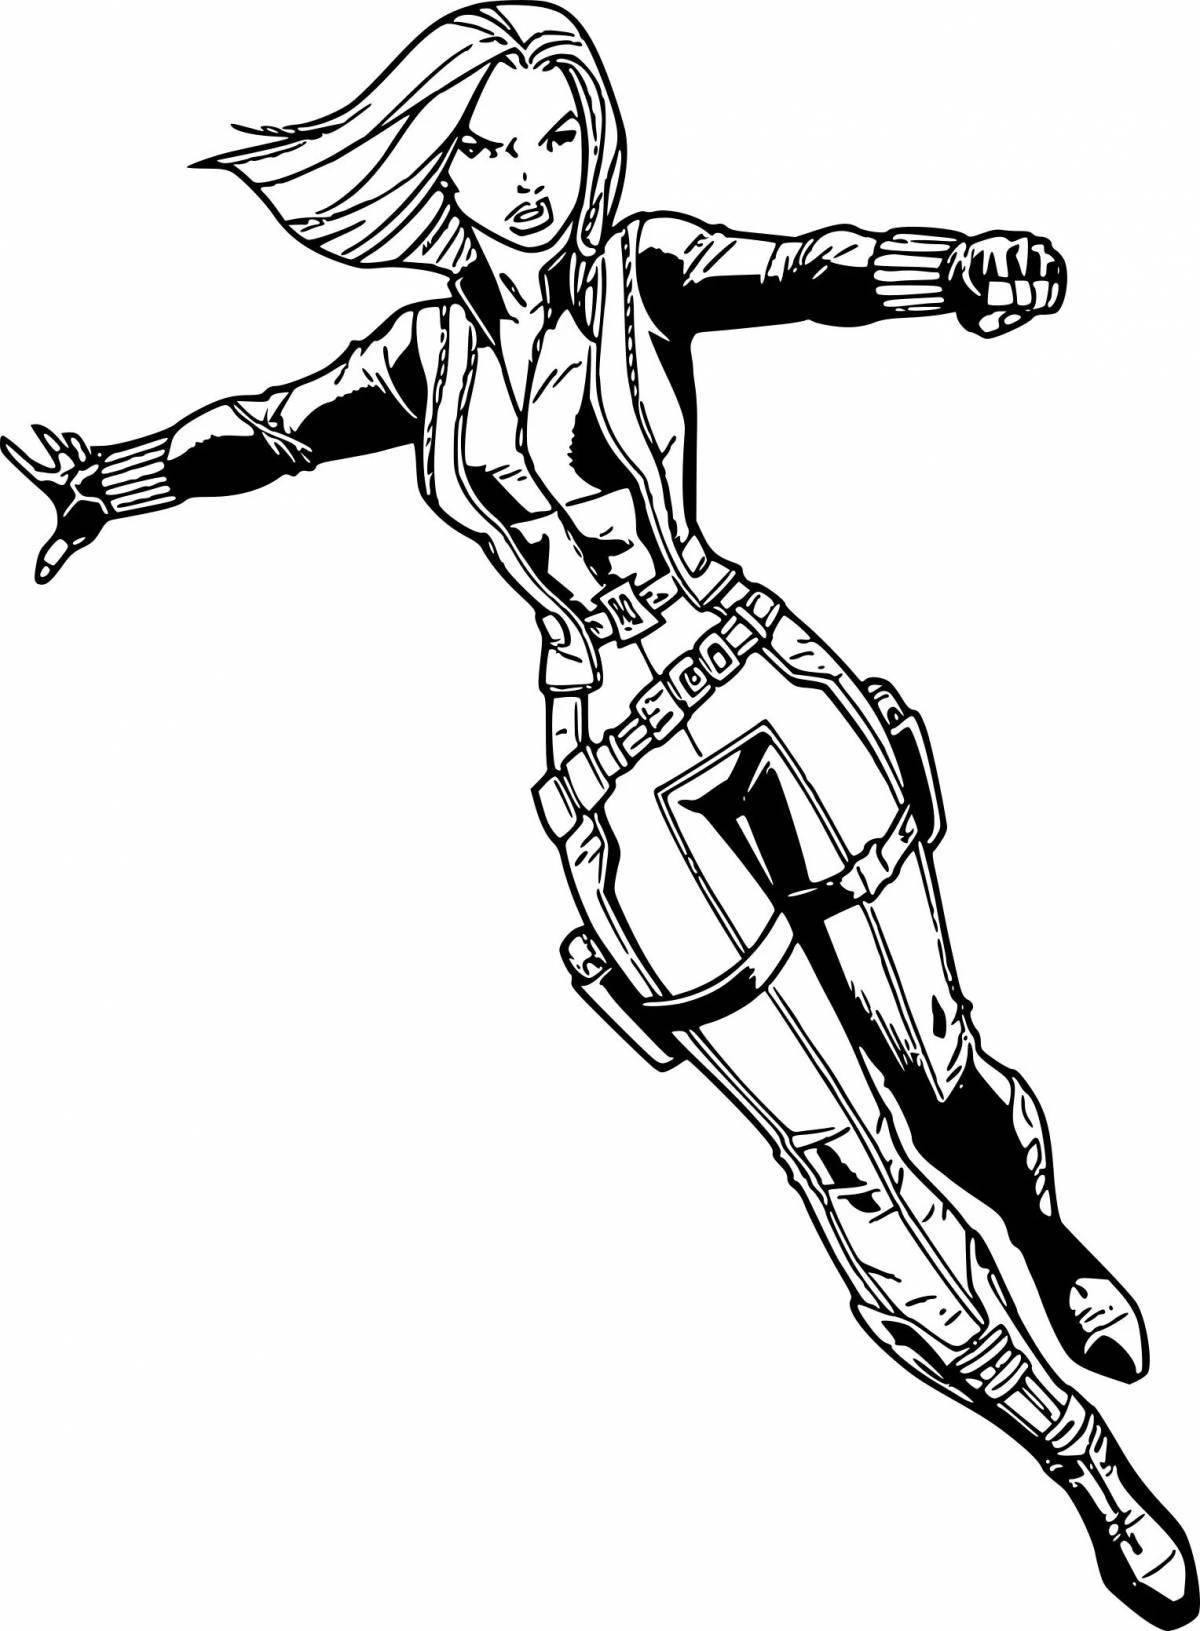 Captain Marvel's amazing coloring page